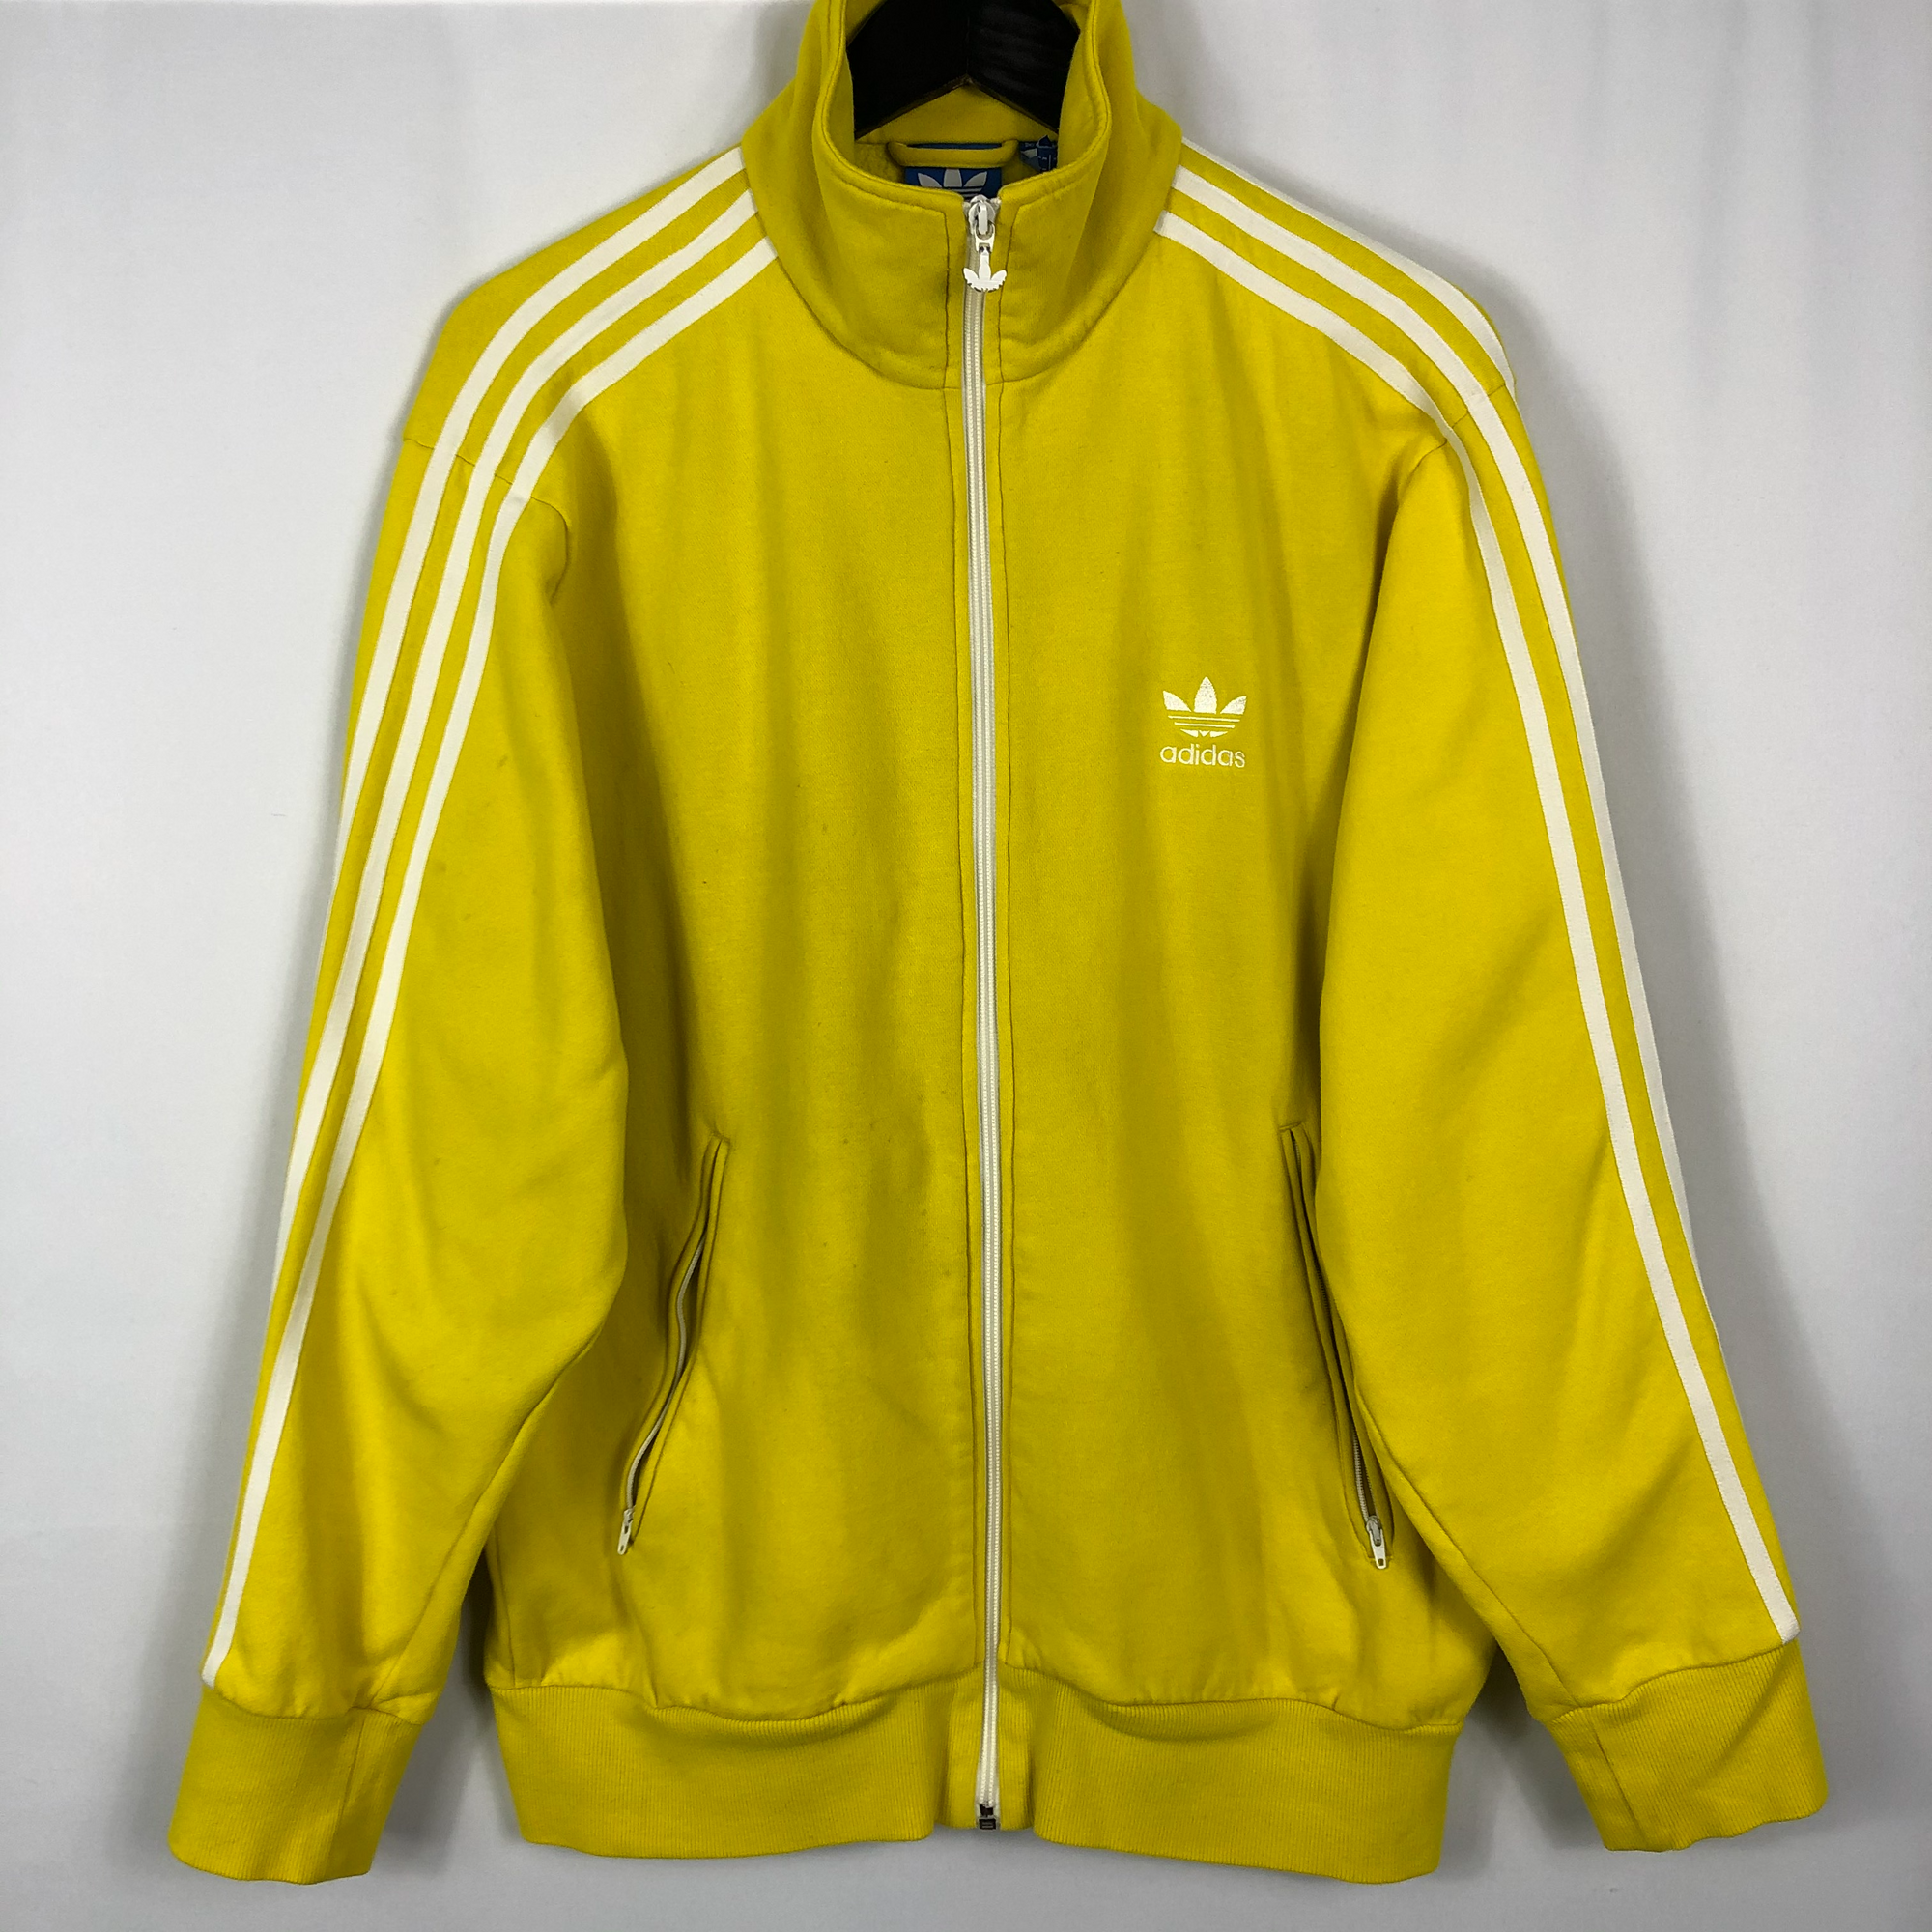 Vintage Adidas Track Jacket in Yellow - Men's Large/Women's XL